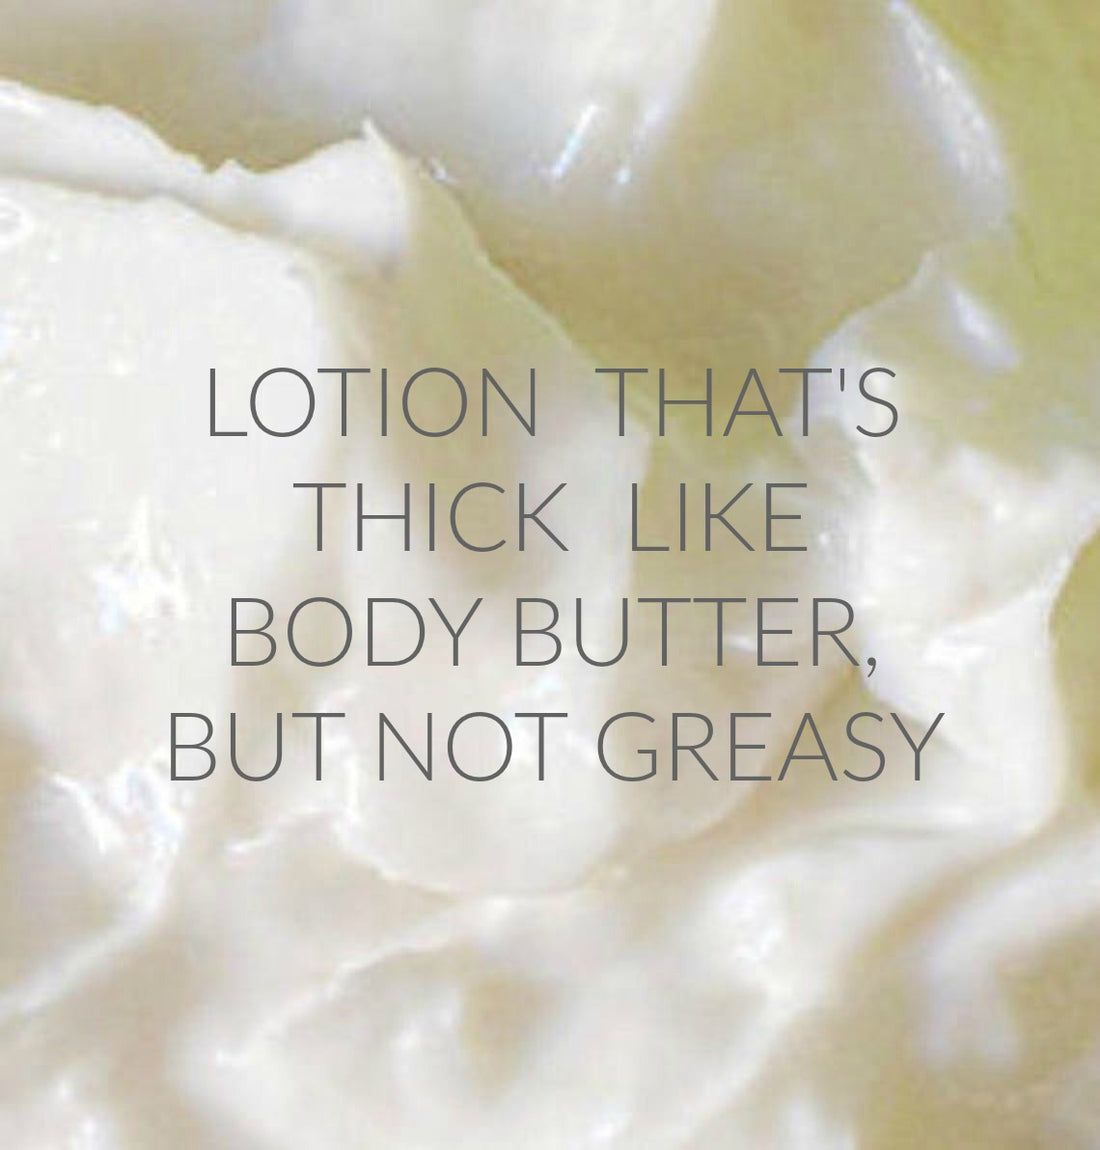 GINGER scented water free, vegan non-greasy Skin Like Butter Body Butter